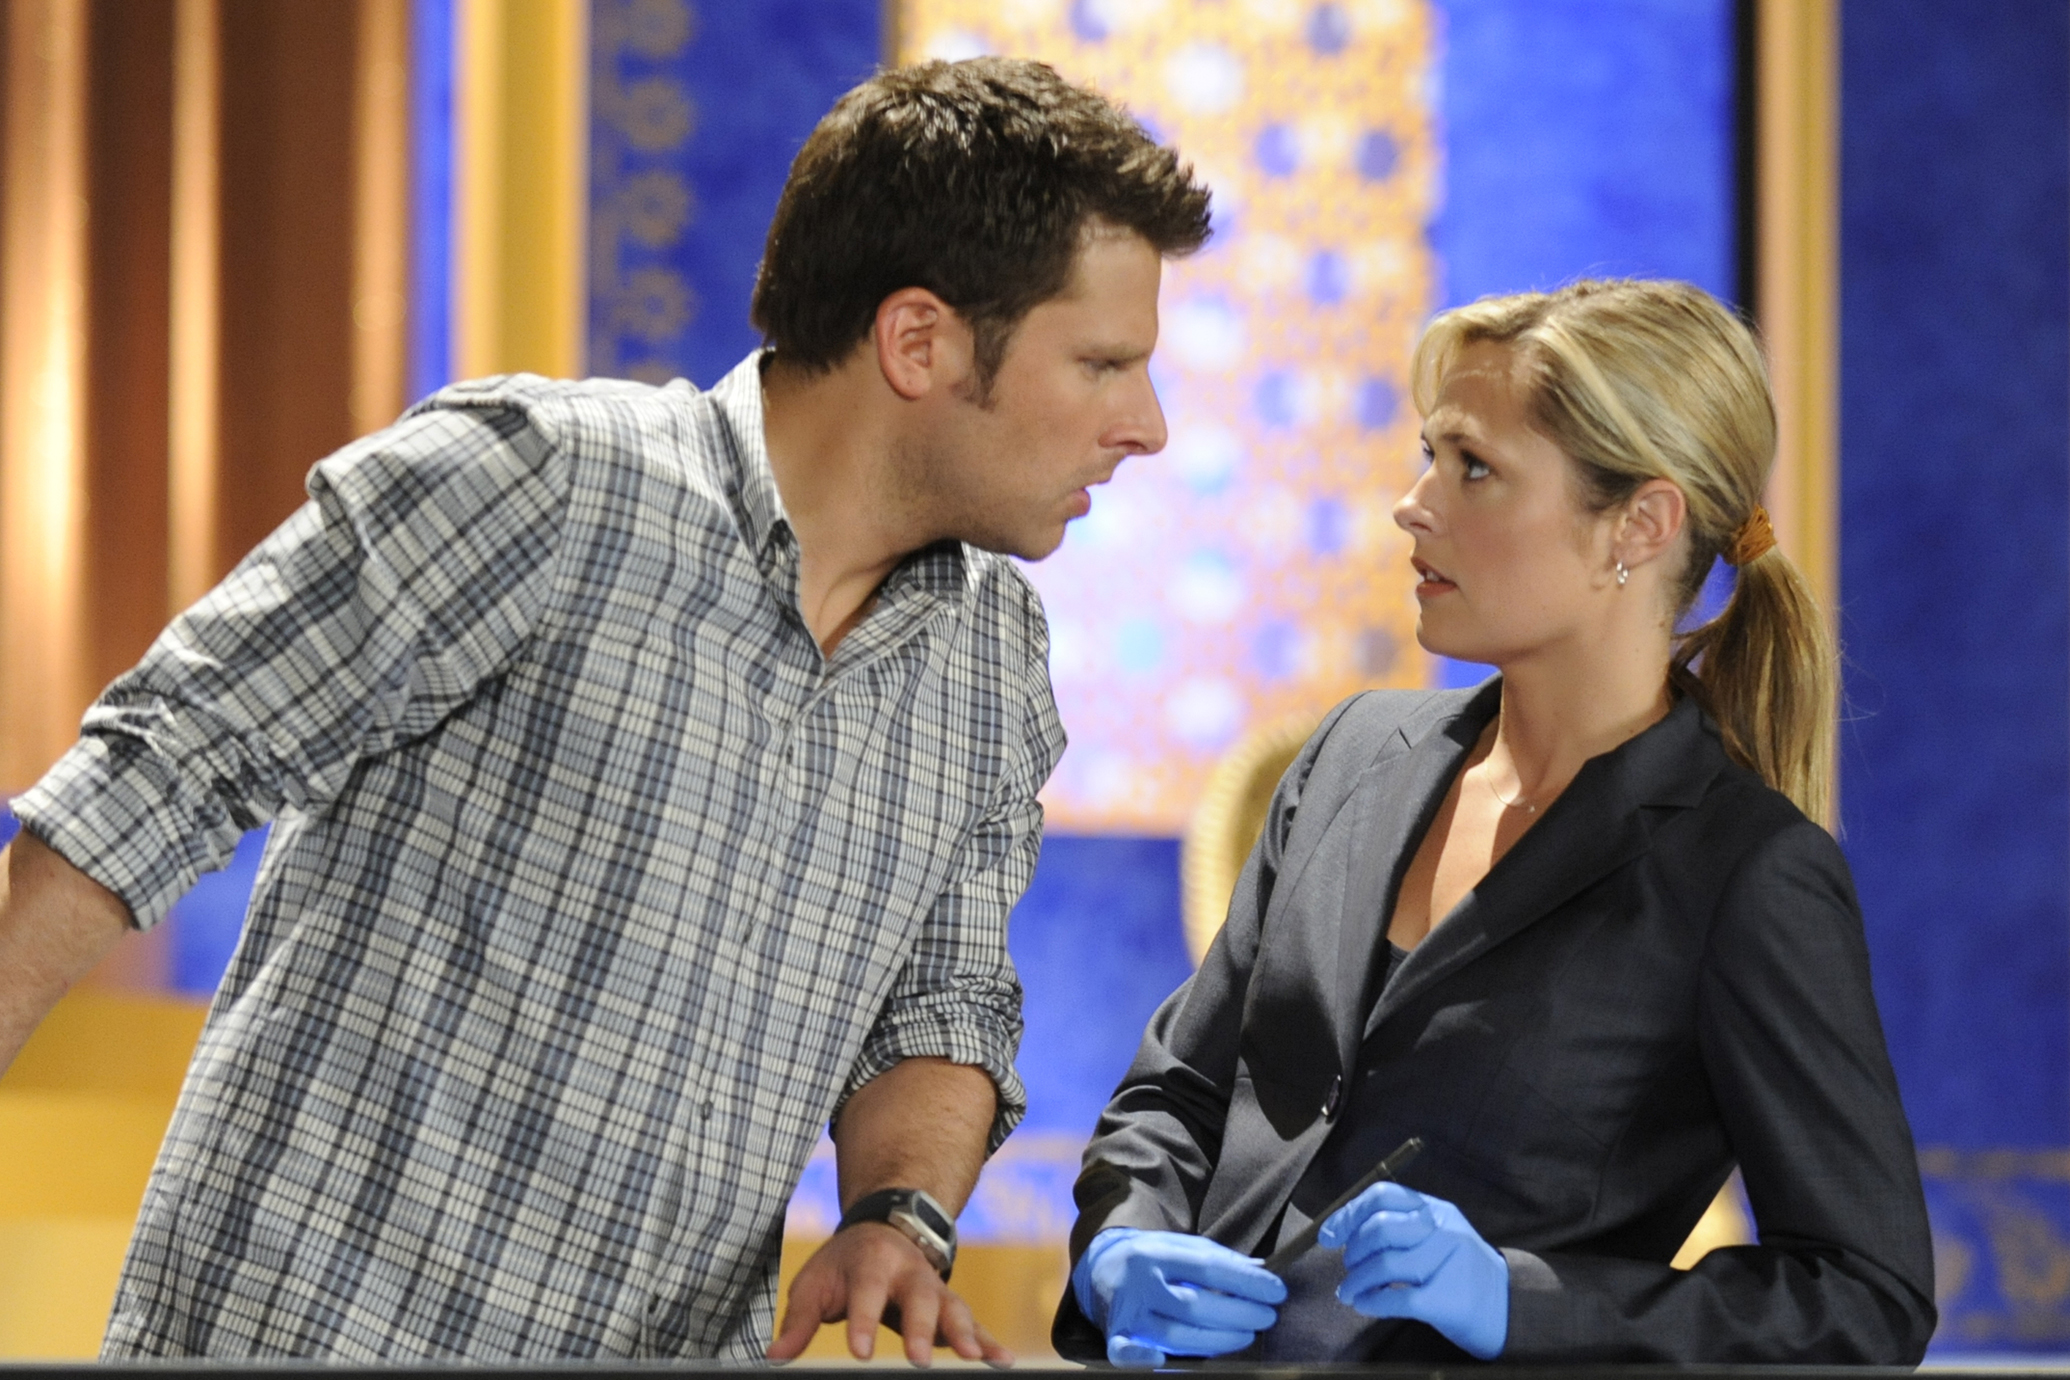 Maggie Lawson says Shawn and Juliet will be enjoying married bliss in the P...